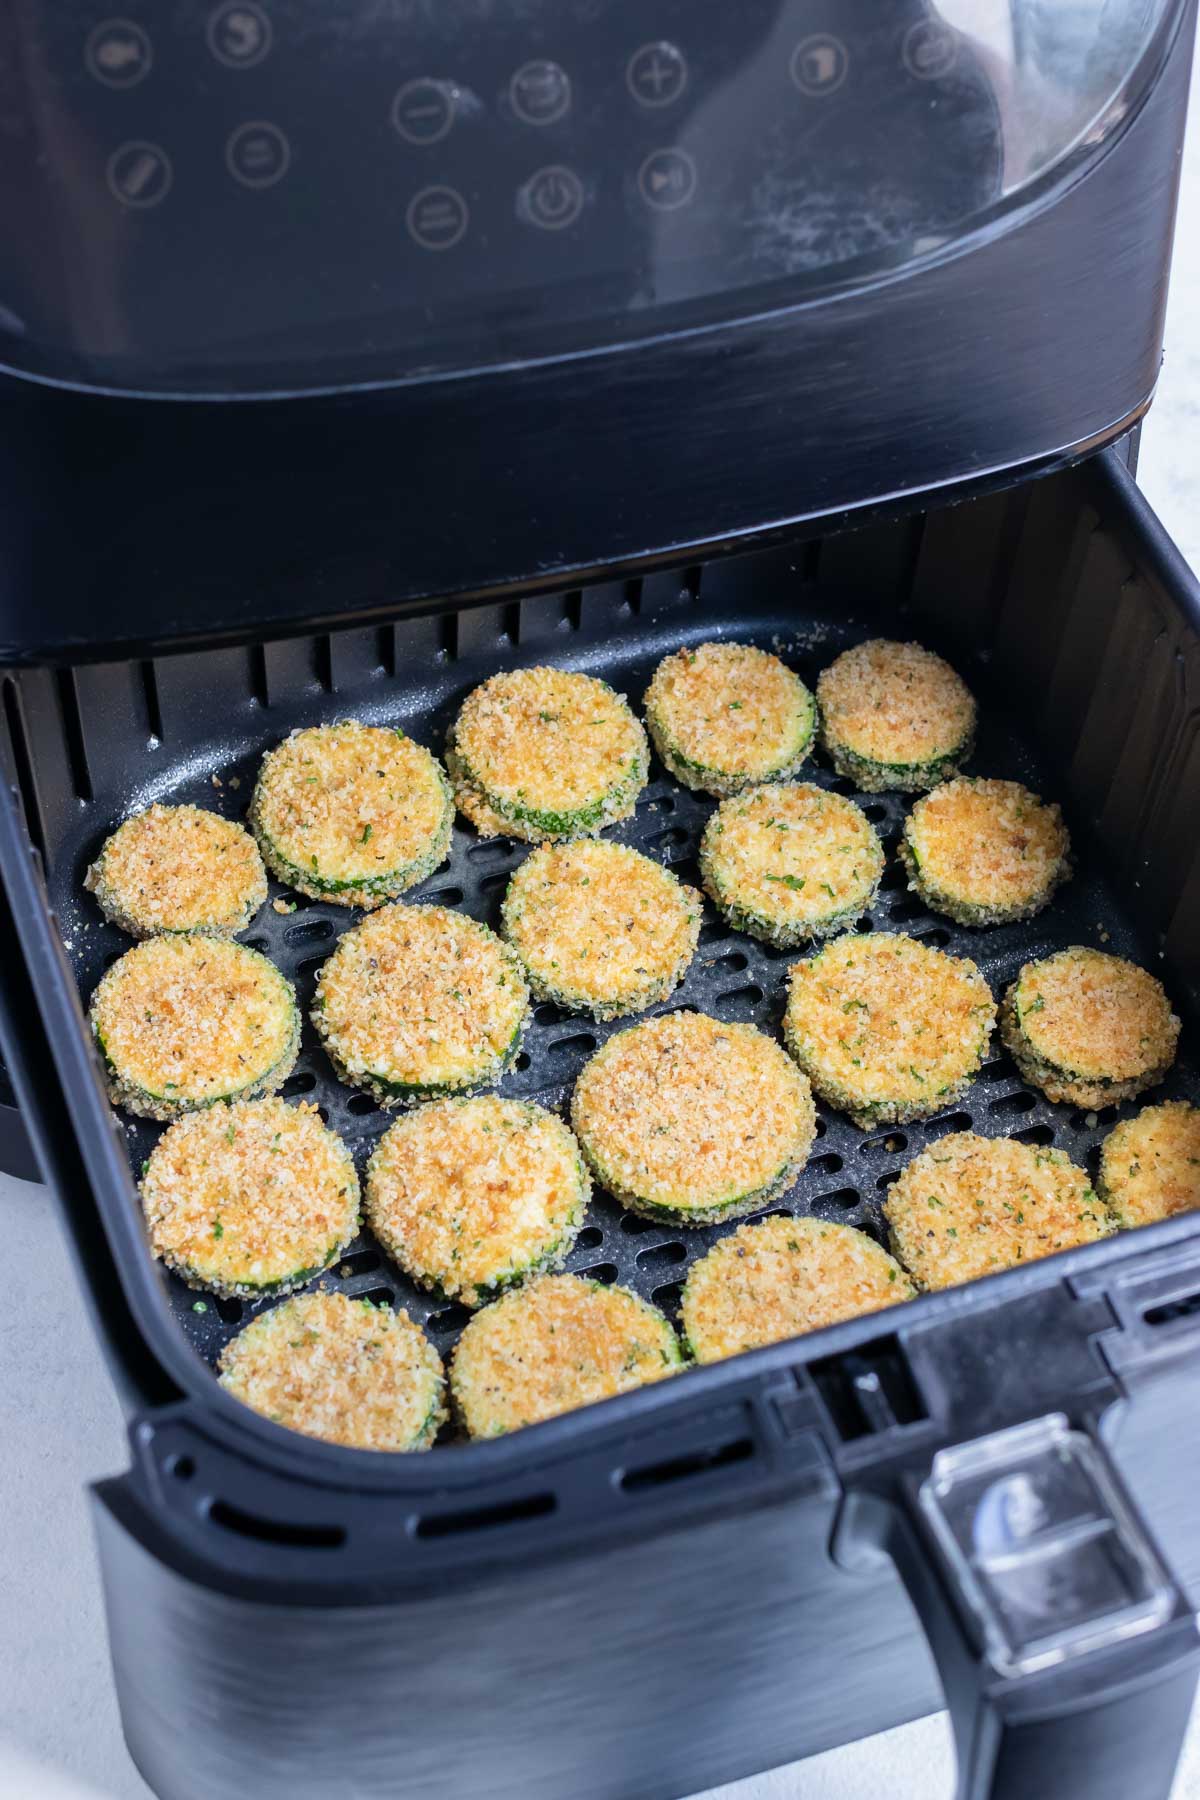 The covered zucchini chips are laid in a flat layer in the air fryer.